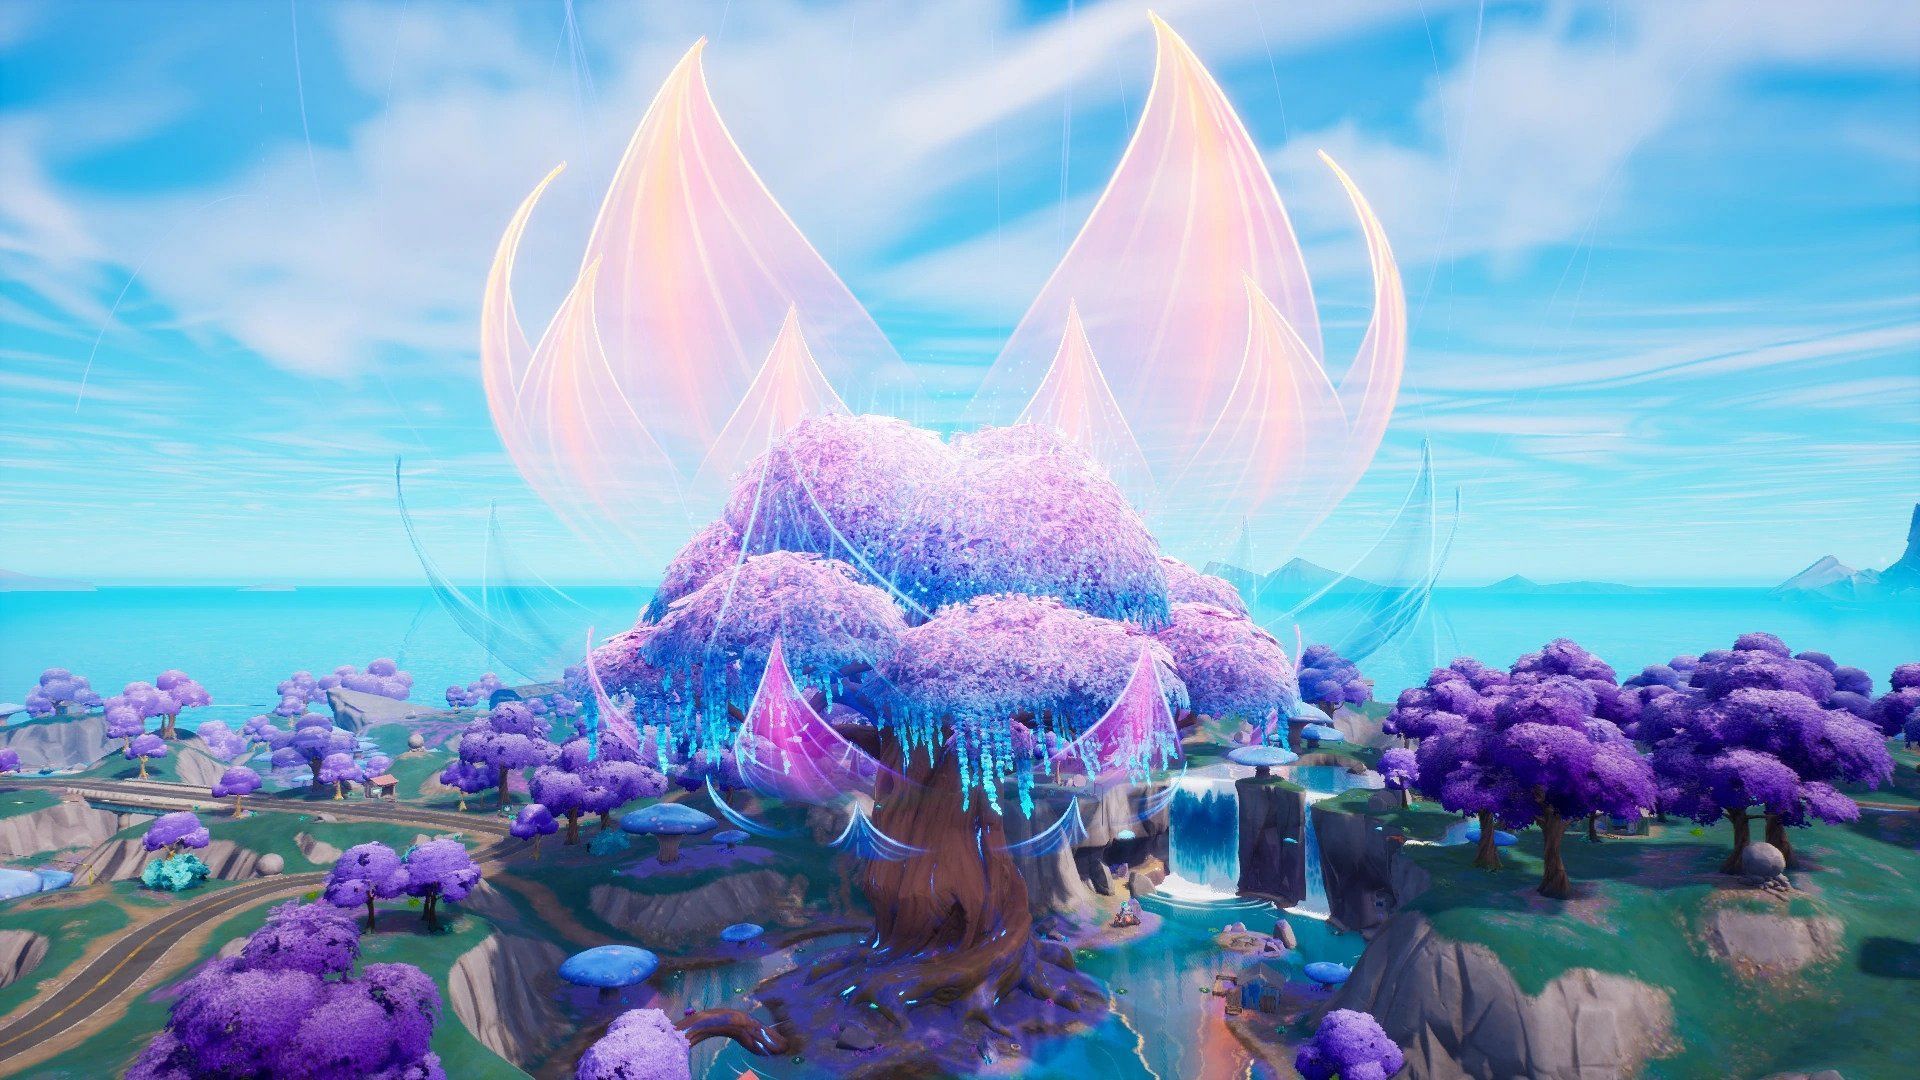 Reality Tree is the most important POI in the latest Fortnite season (Image via Epic Games)